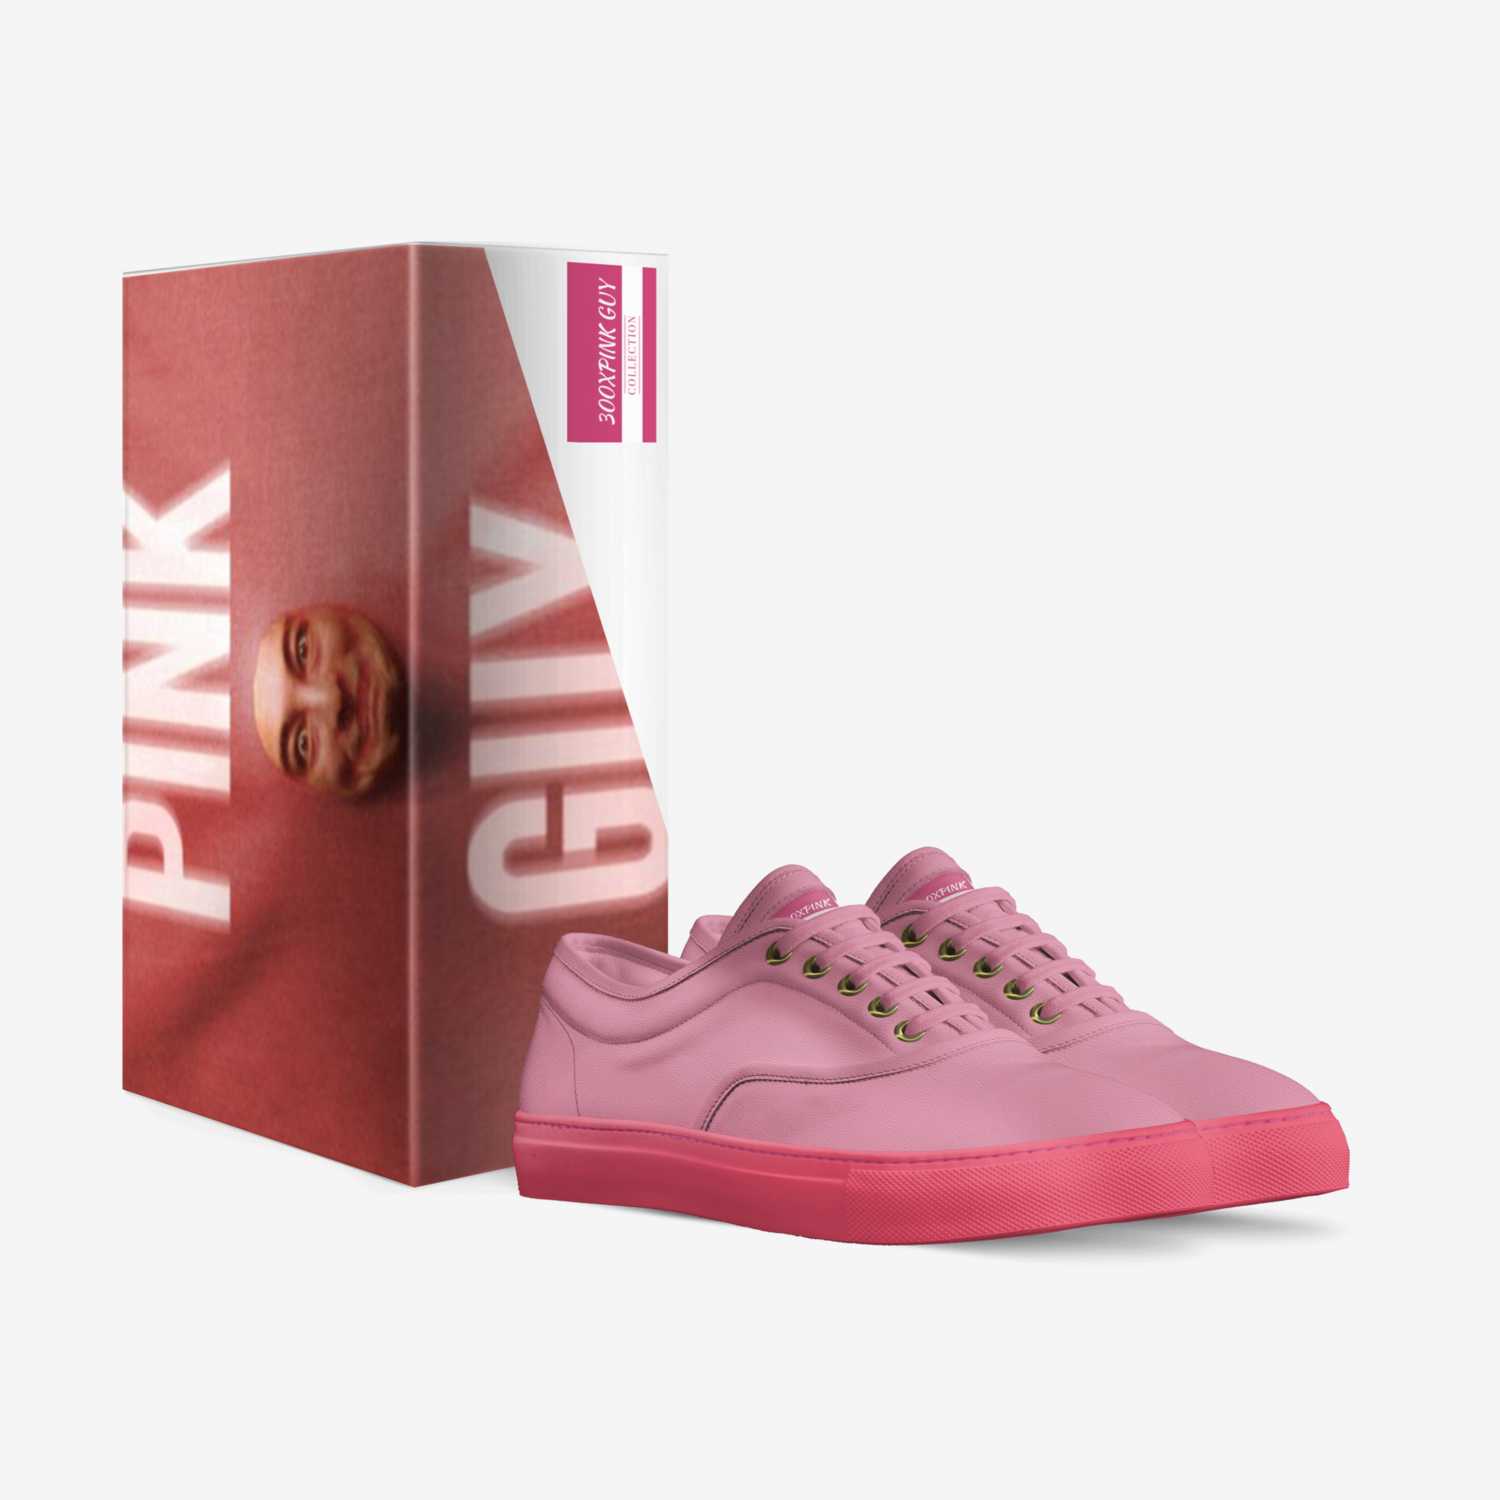 300XPINK GUY custom made in Italy shoes by Kaiode | Box view